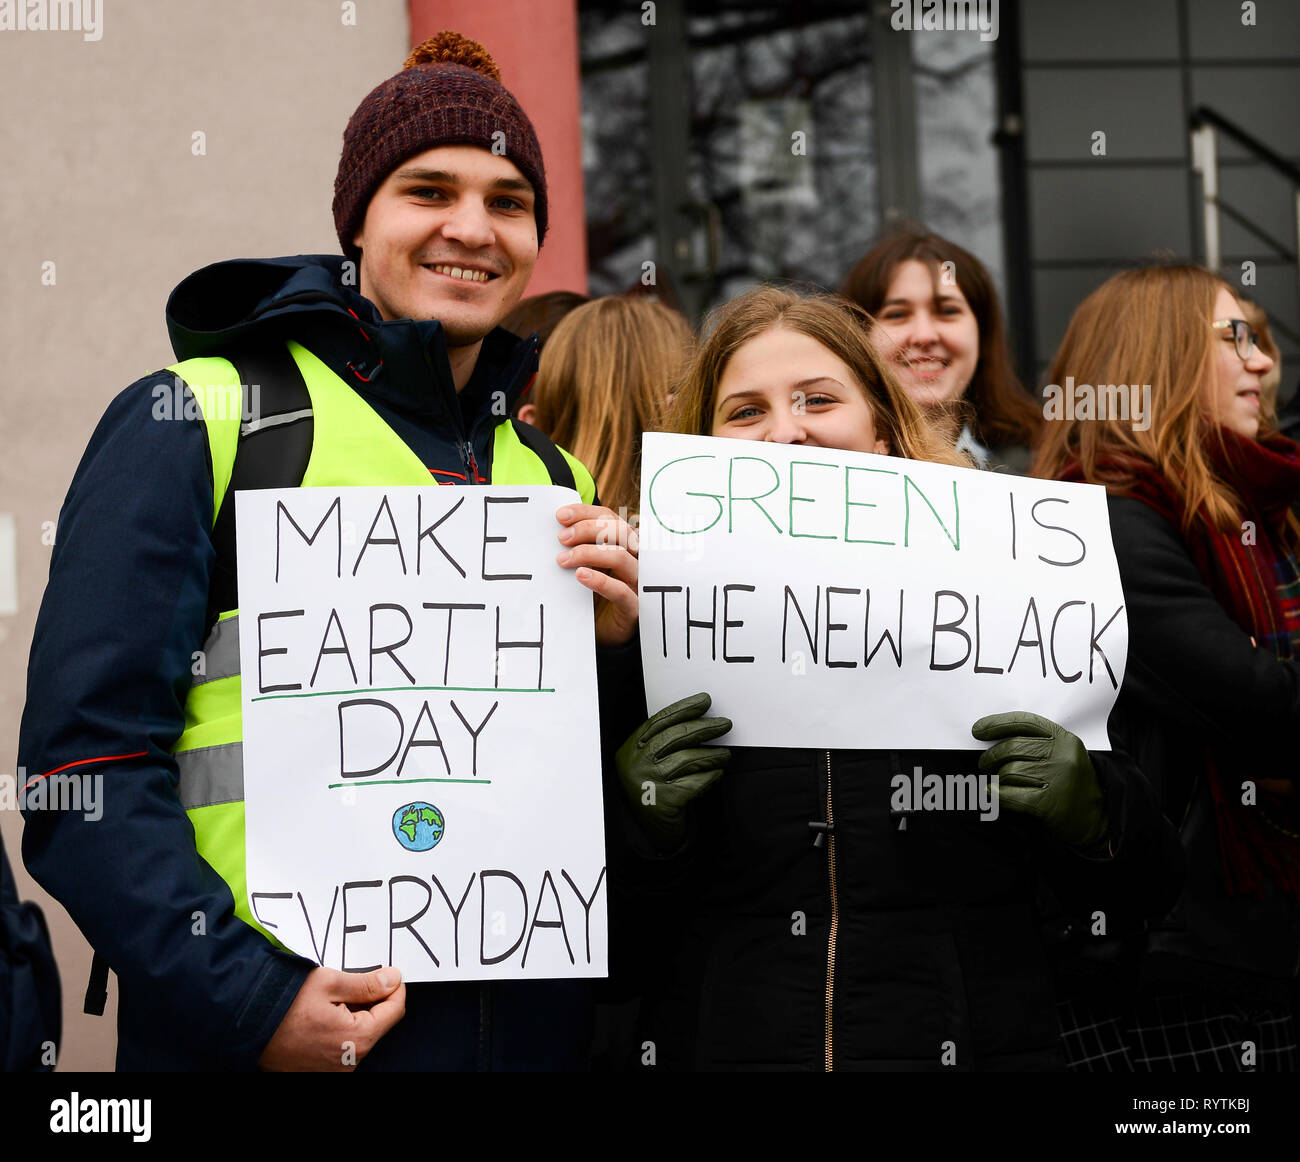 Belchatow, Poland. 15th Mar, 2019. School students prostest against climate changes on March 15, 2019 in Belchatow, Poland. Credit: East News sp. z o.o./Alamy Live News Stock Photo